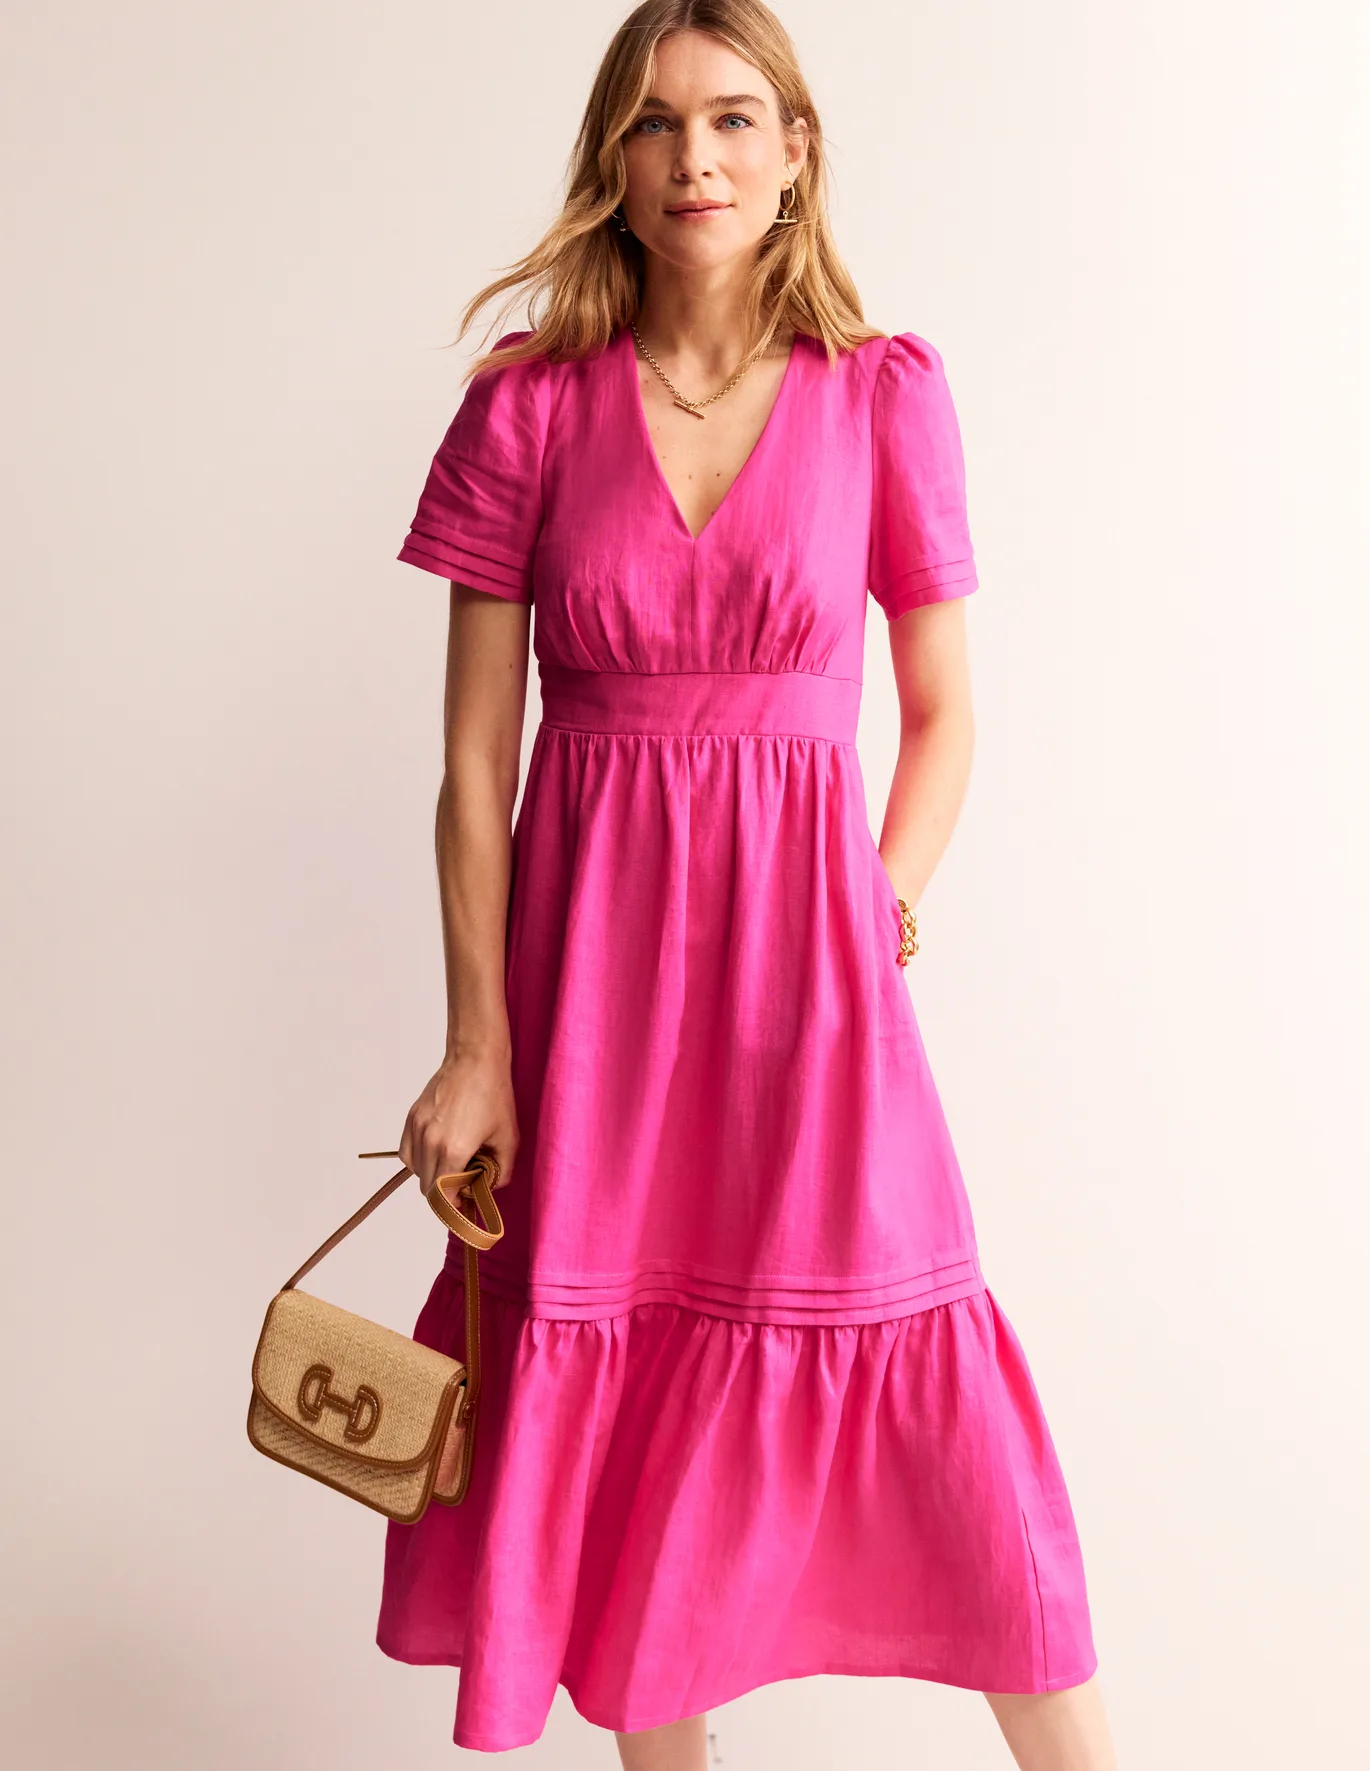 Discover the allure of pink summer dresses with our ultimate guide. From chic linen shifts to playful gingham patterns, find the perfect pink dress for every summer occasion—be it brunch, beach, or a night out. Elevate your summer wardrobe with our top picks and styling tips for the season's most coveted dresses. Pink Summer Dress | Pink Summer Dresses | Pink Dress | Pink Clothes | Pink Mini Dress | Pink Dress Outfit | Light Pink Dress | Floral | Stripe |